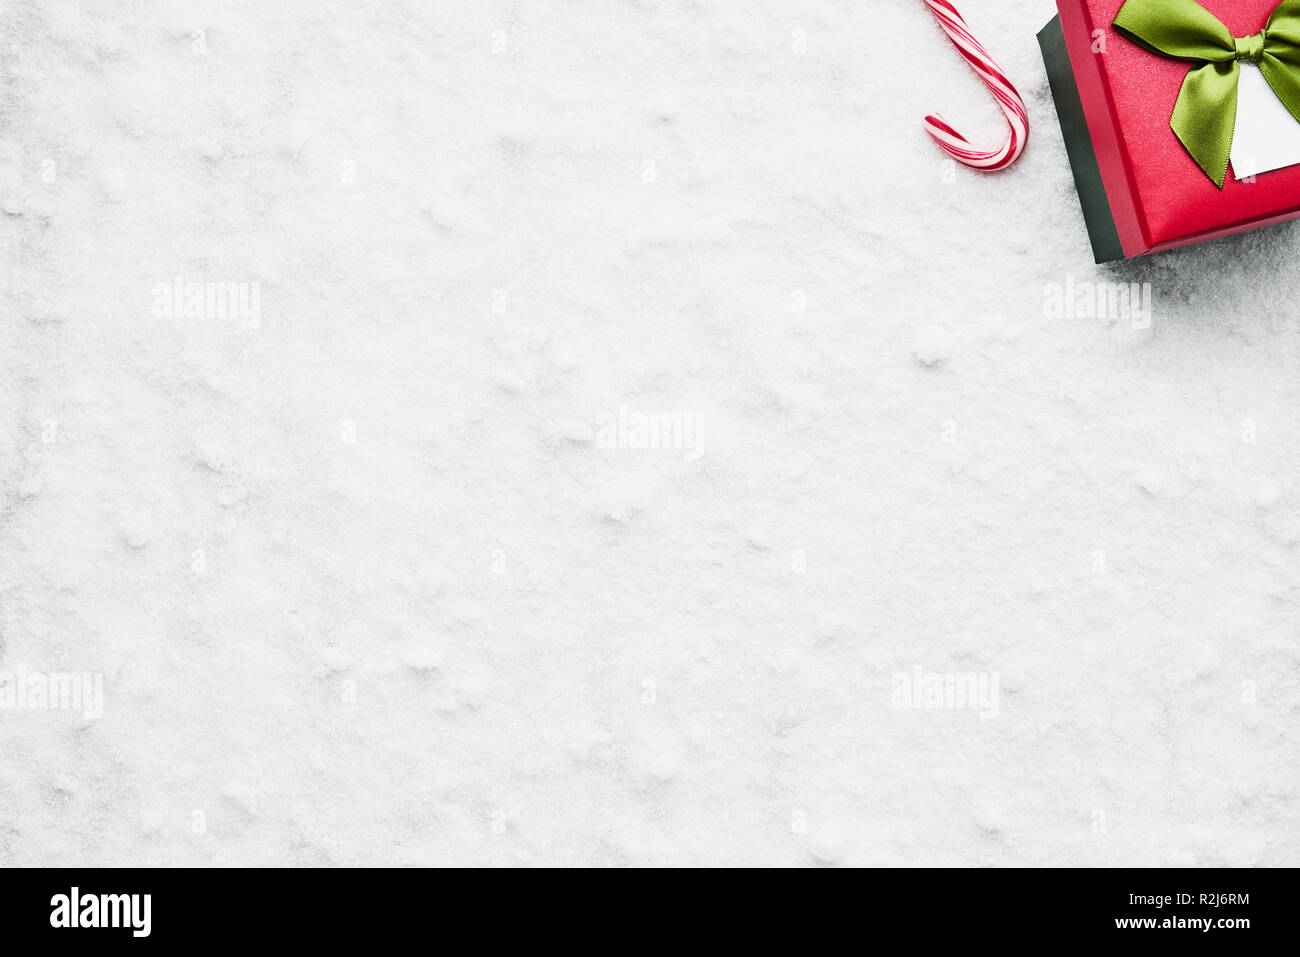 Top view of green and red Christmas gift box with ribbon and candy cane on the snow. Copy space for text. Stock Photo